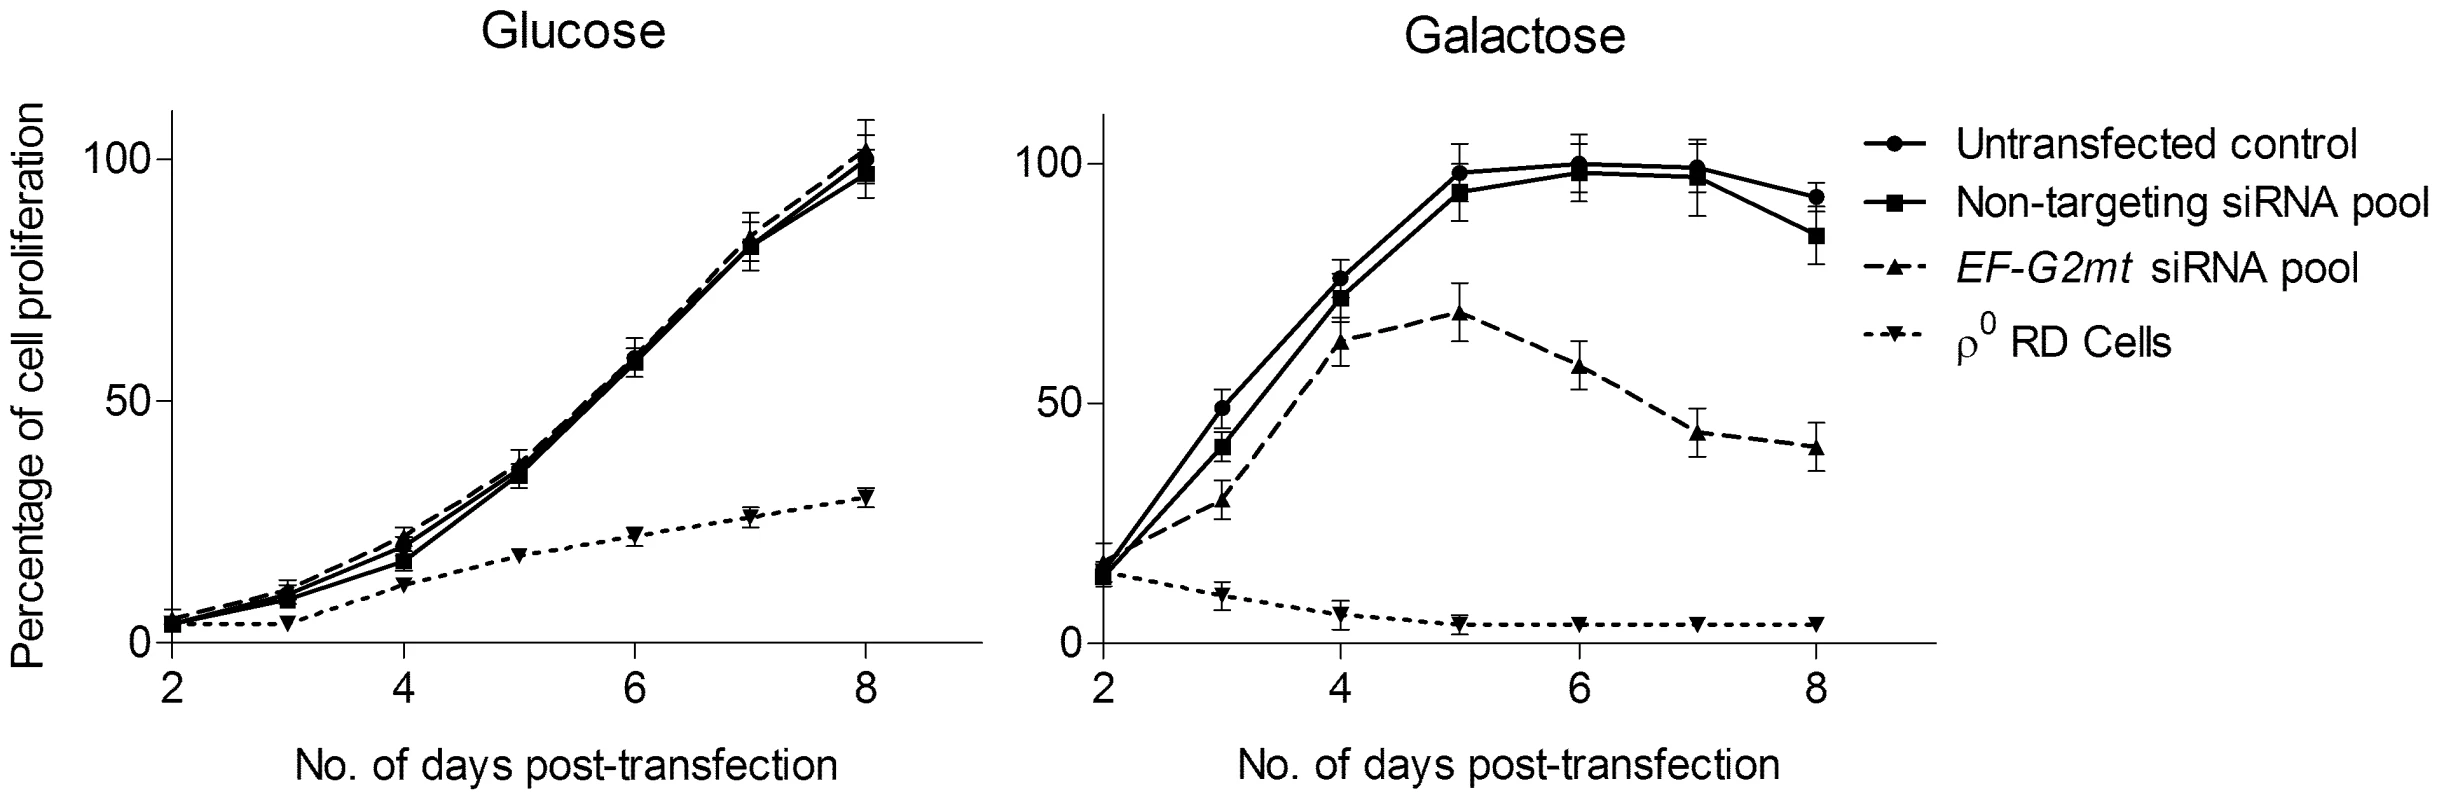 Growth of siRNA transfected RD cells in glucose and galactose medium.